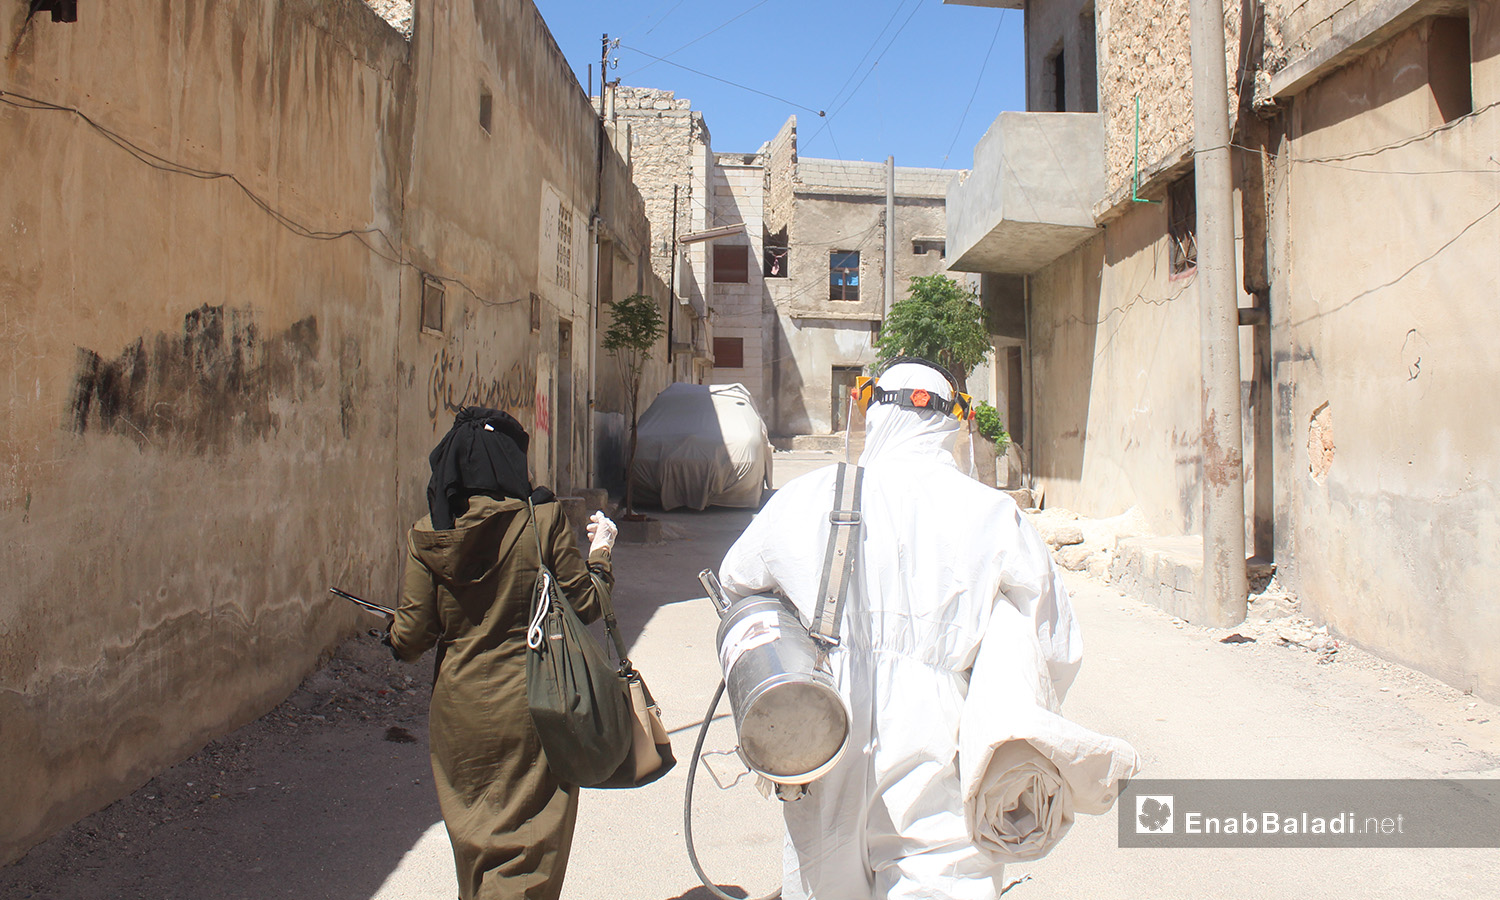 An insecticide spraying and awareness campaign on the Leishmaniasis disease in Idlib countryside – August 2020 (Enab Baladi / Iyad Abdel Jawad)